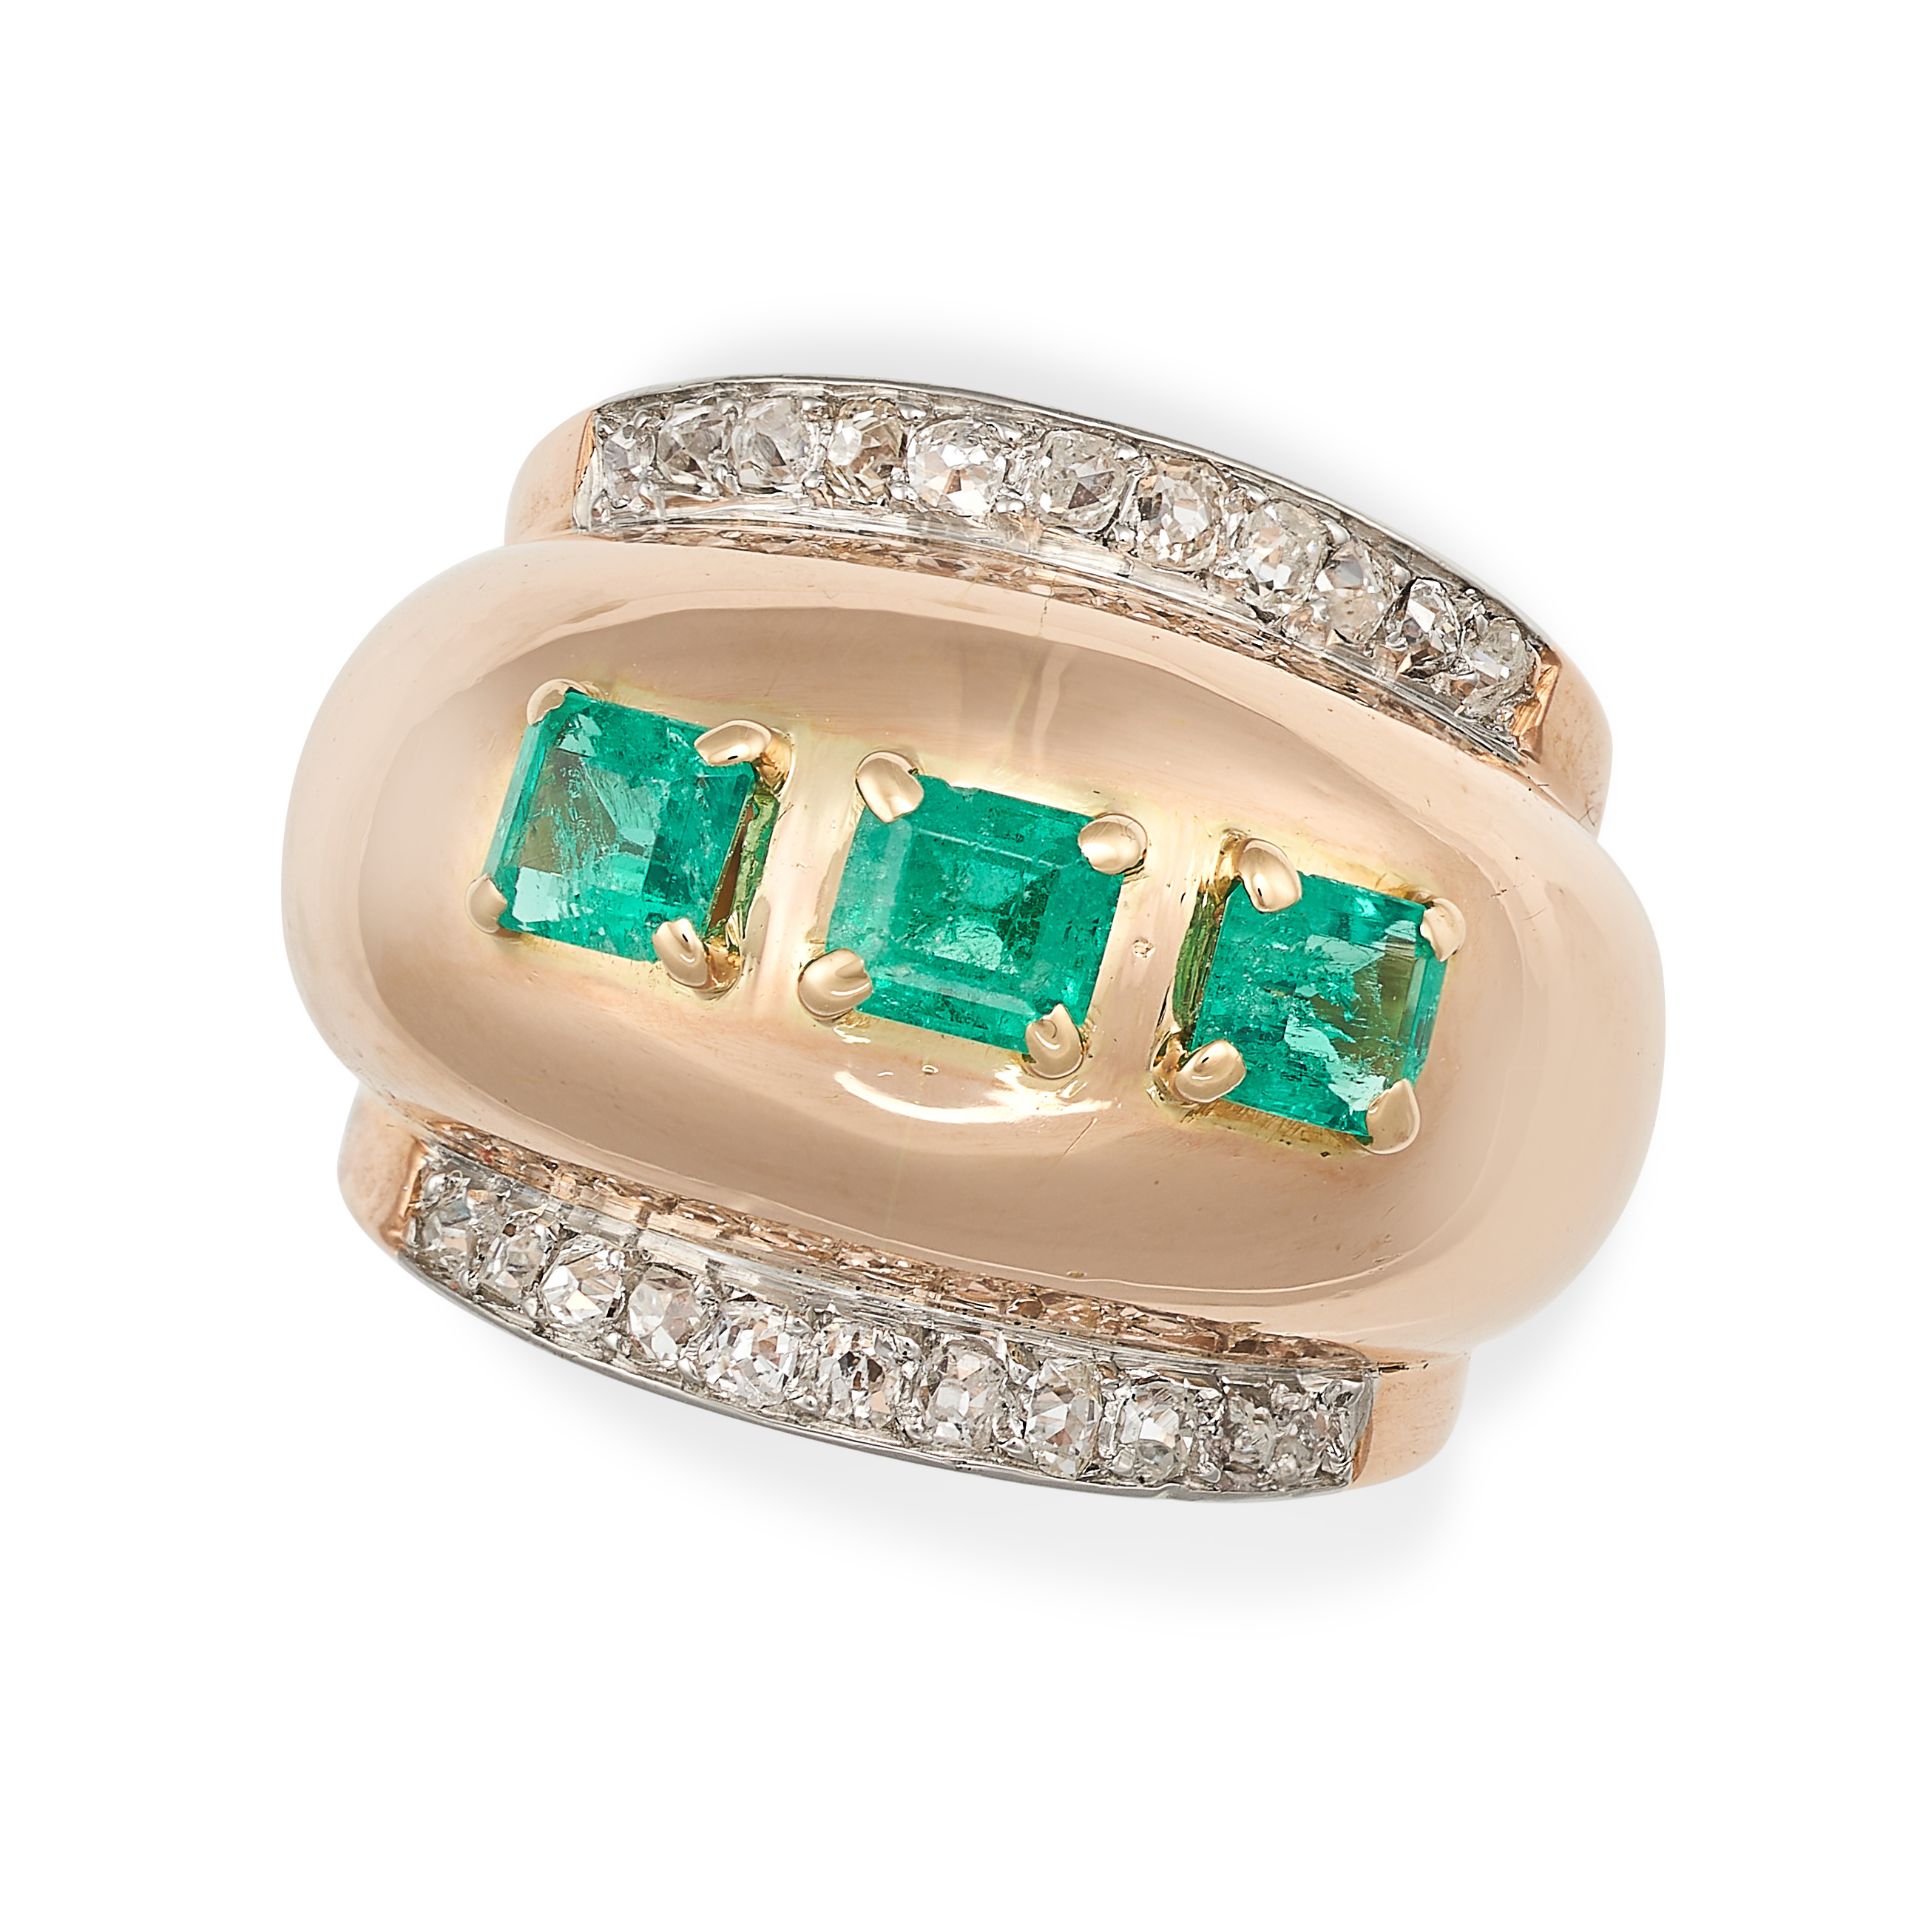 BOUCHERON, A RETRO EMERALD AND DIAMOND BOMBE RING in 18ct rose gold and platinum, the domed face set